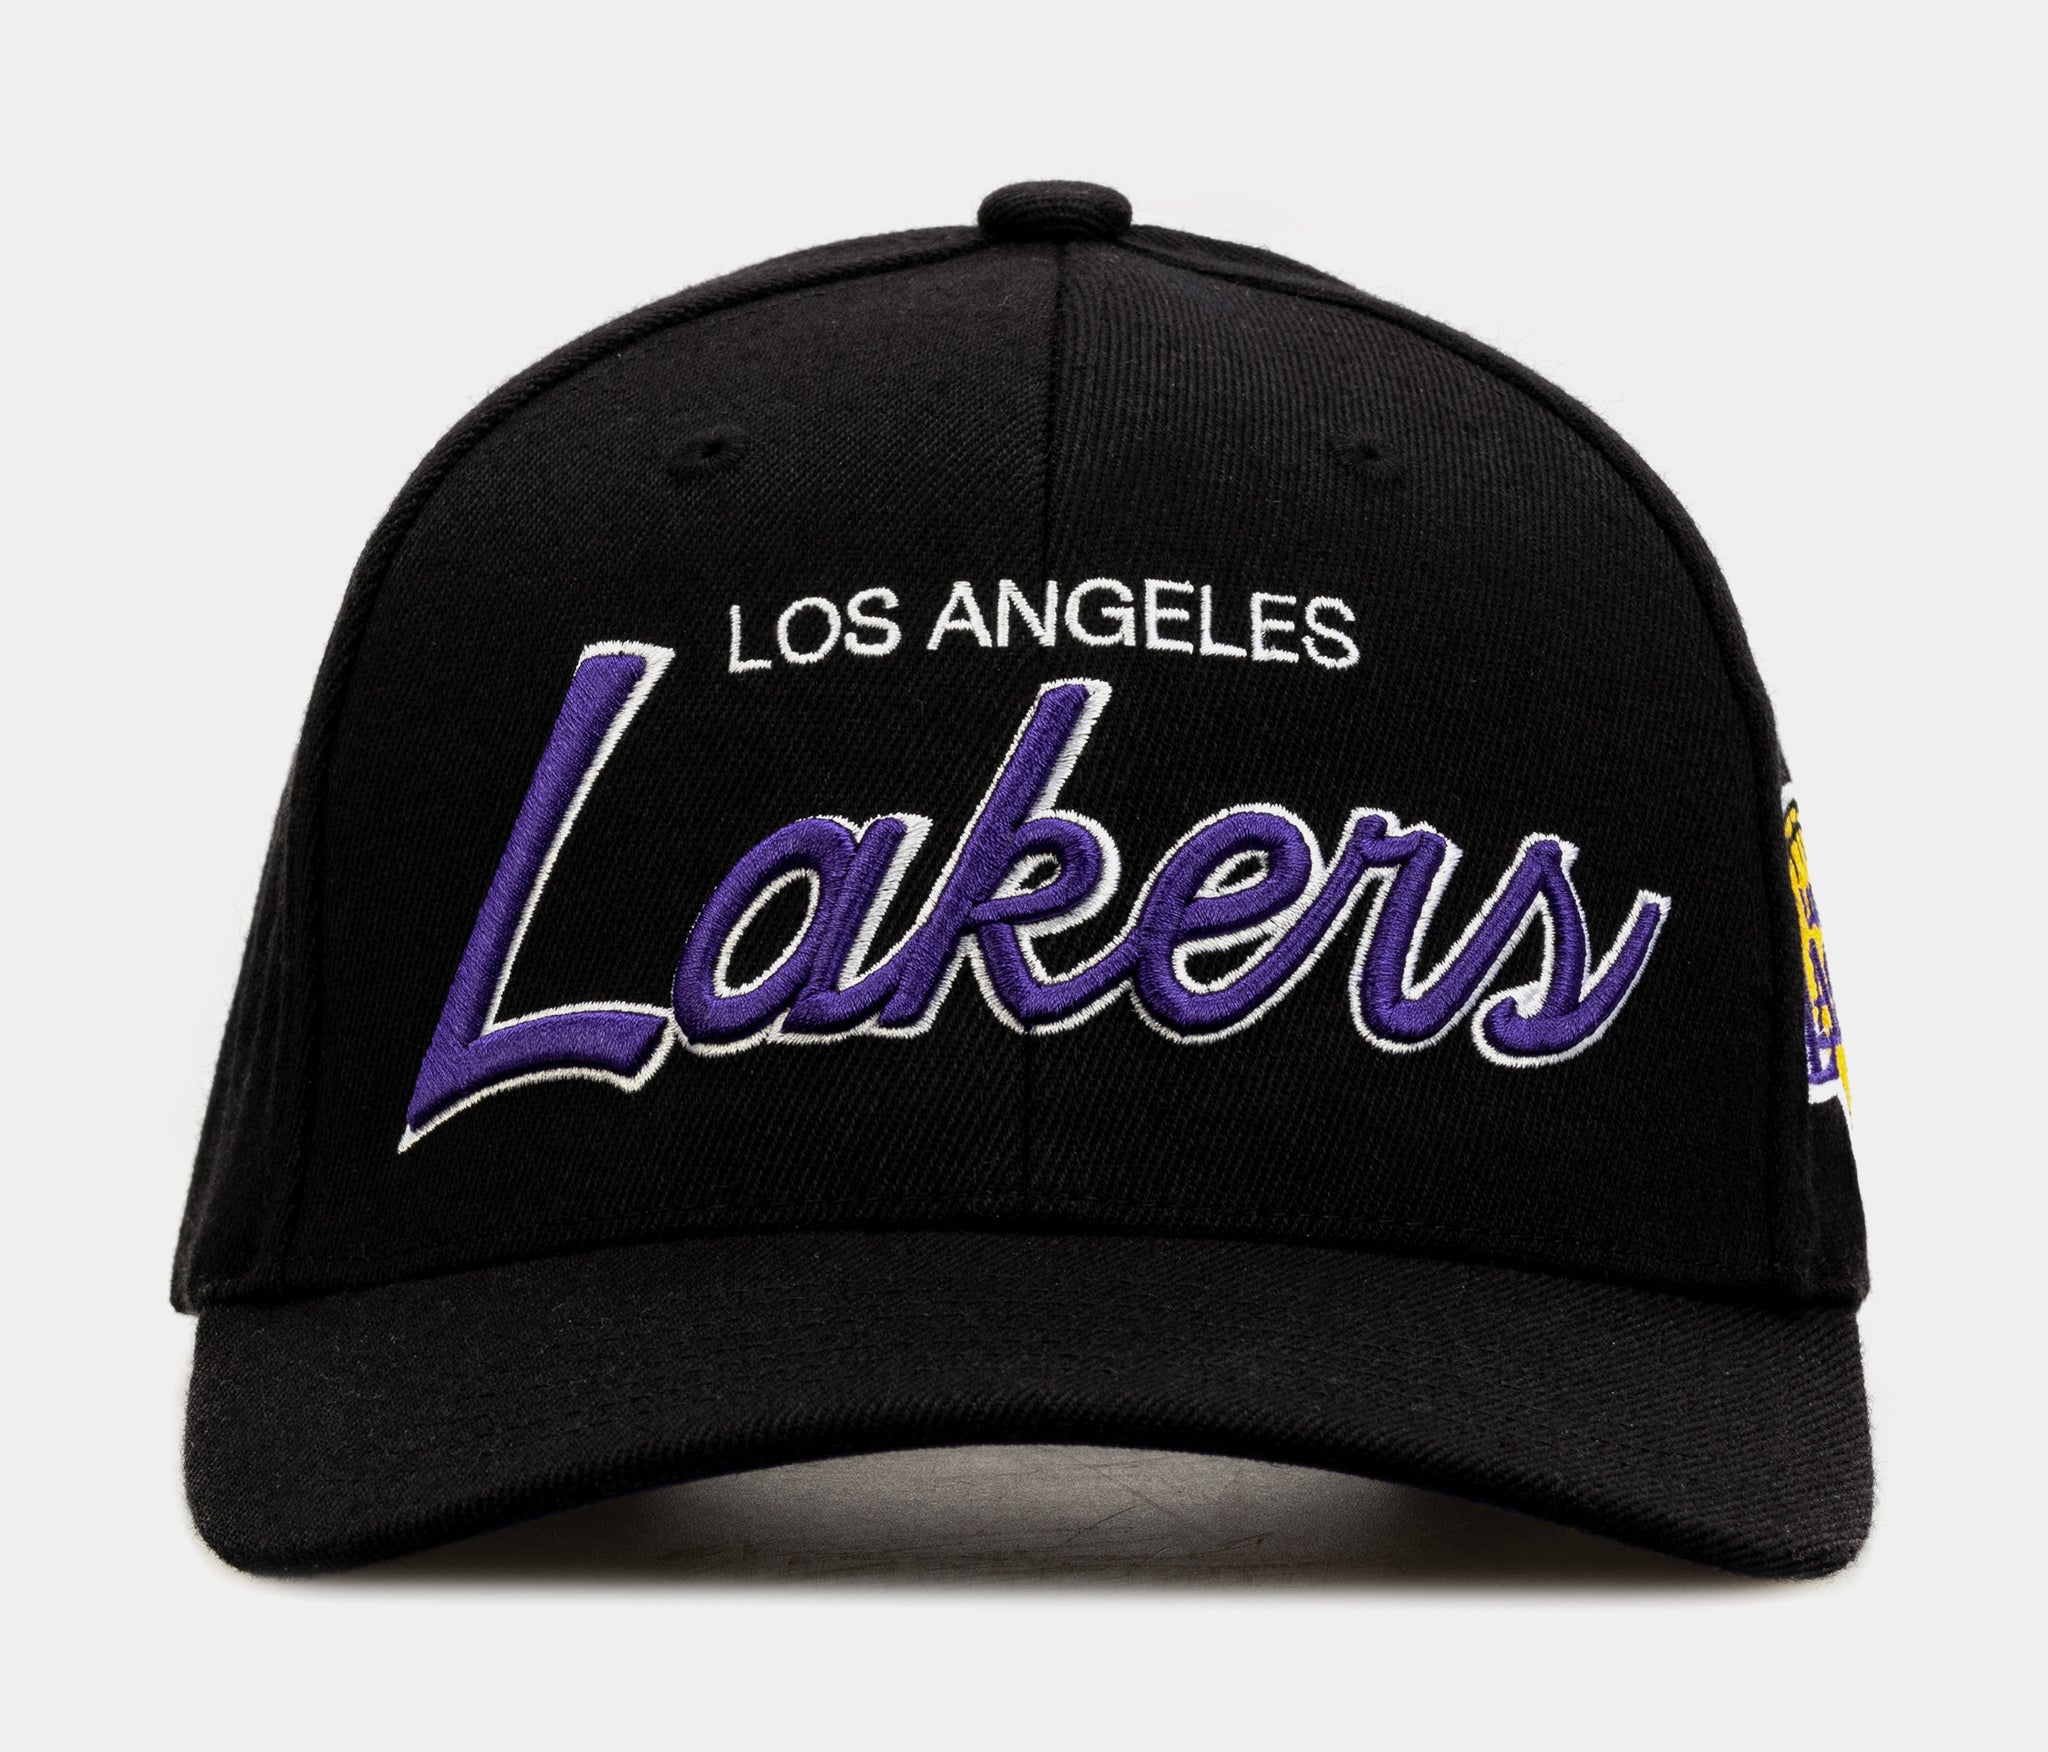 Mitchell & Ness Los Angeles Lakers Championship Patch Fitted Cap